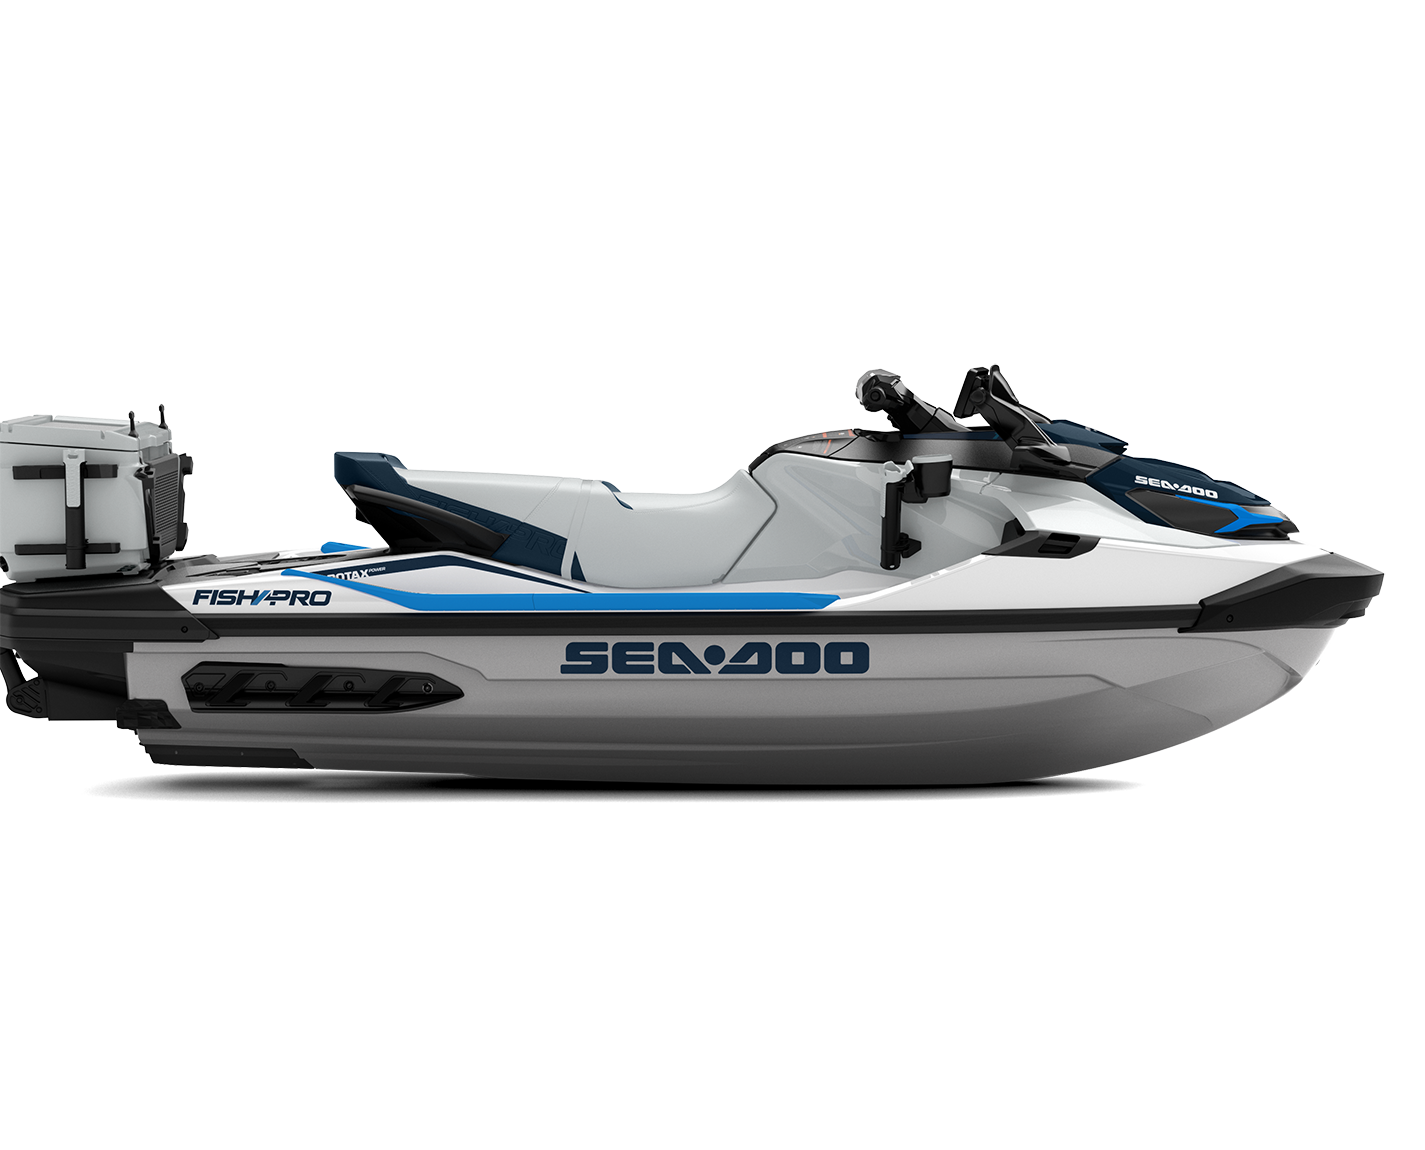 Sea-Doo FishPro Sport 170 without sound system MY23 - White / Gulfstream Blue - Side view